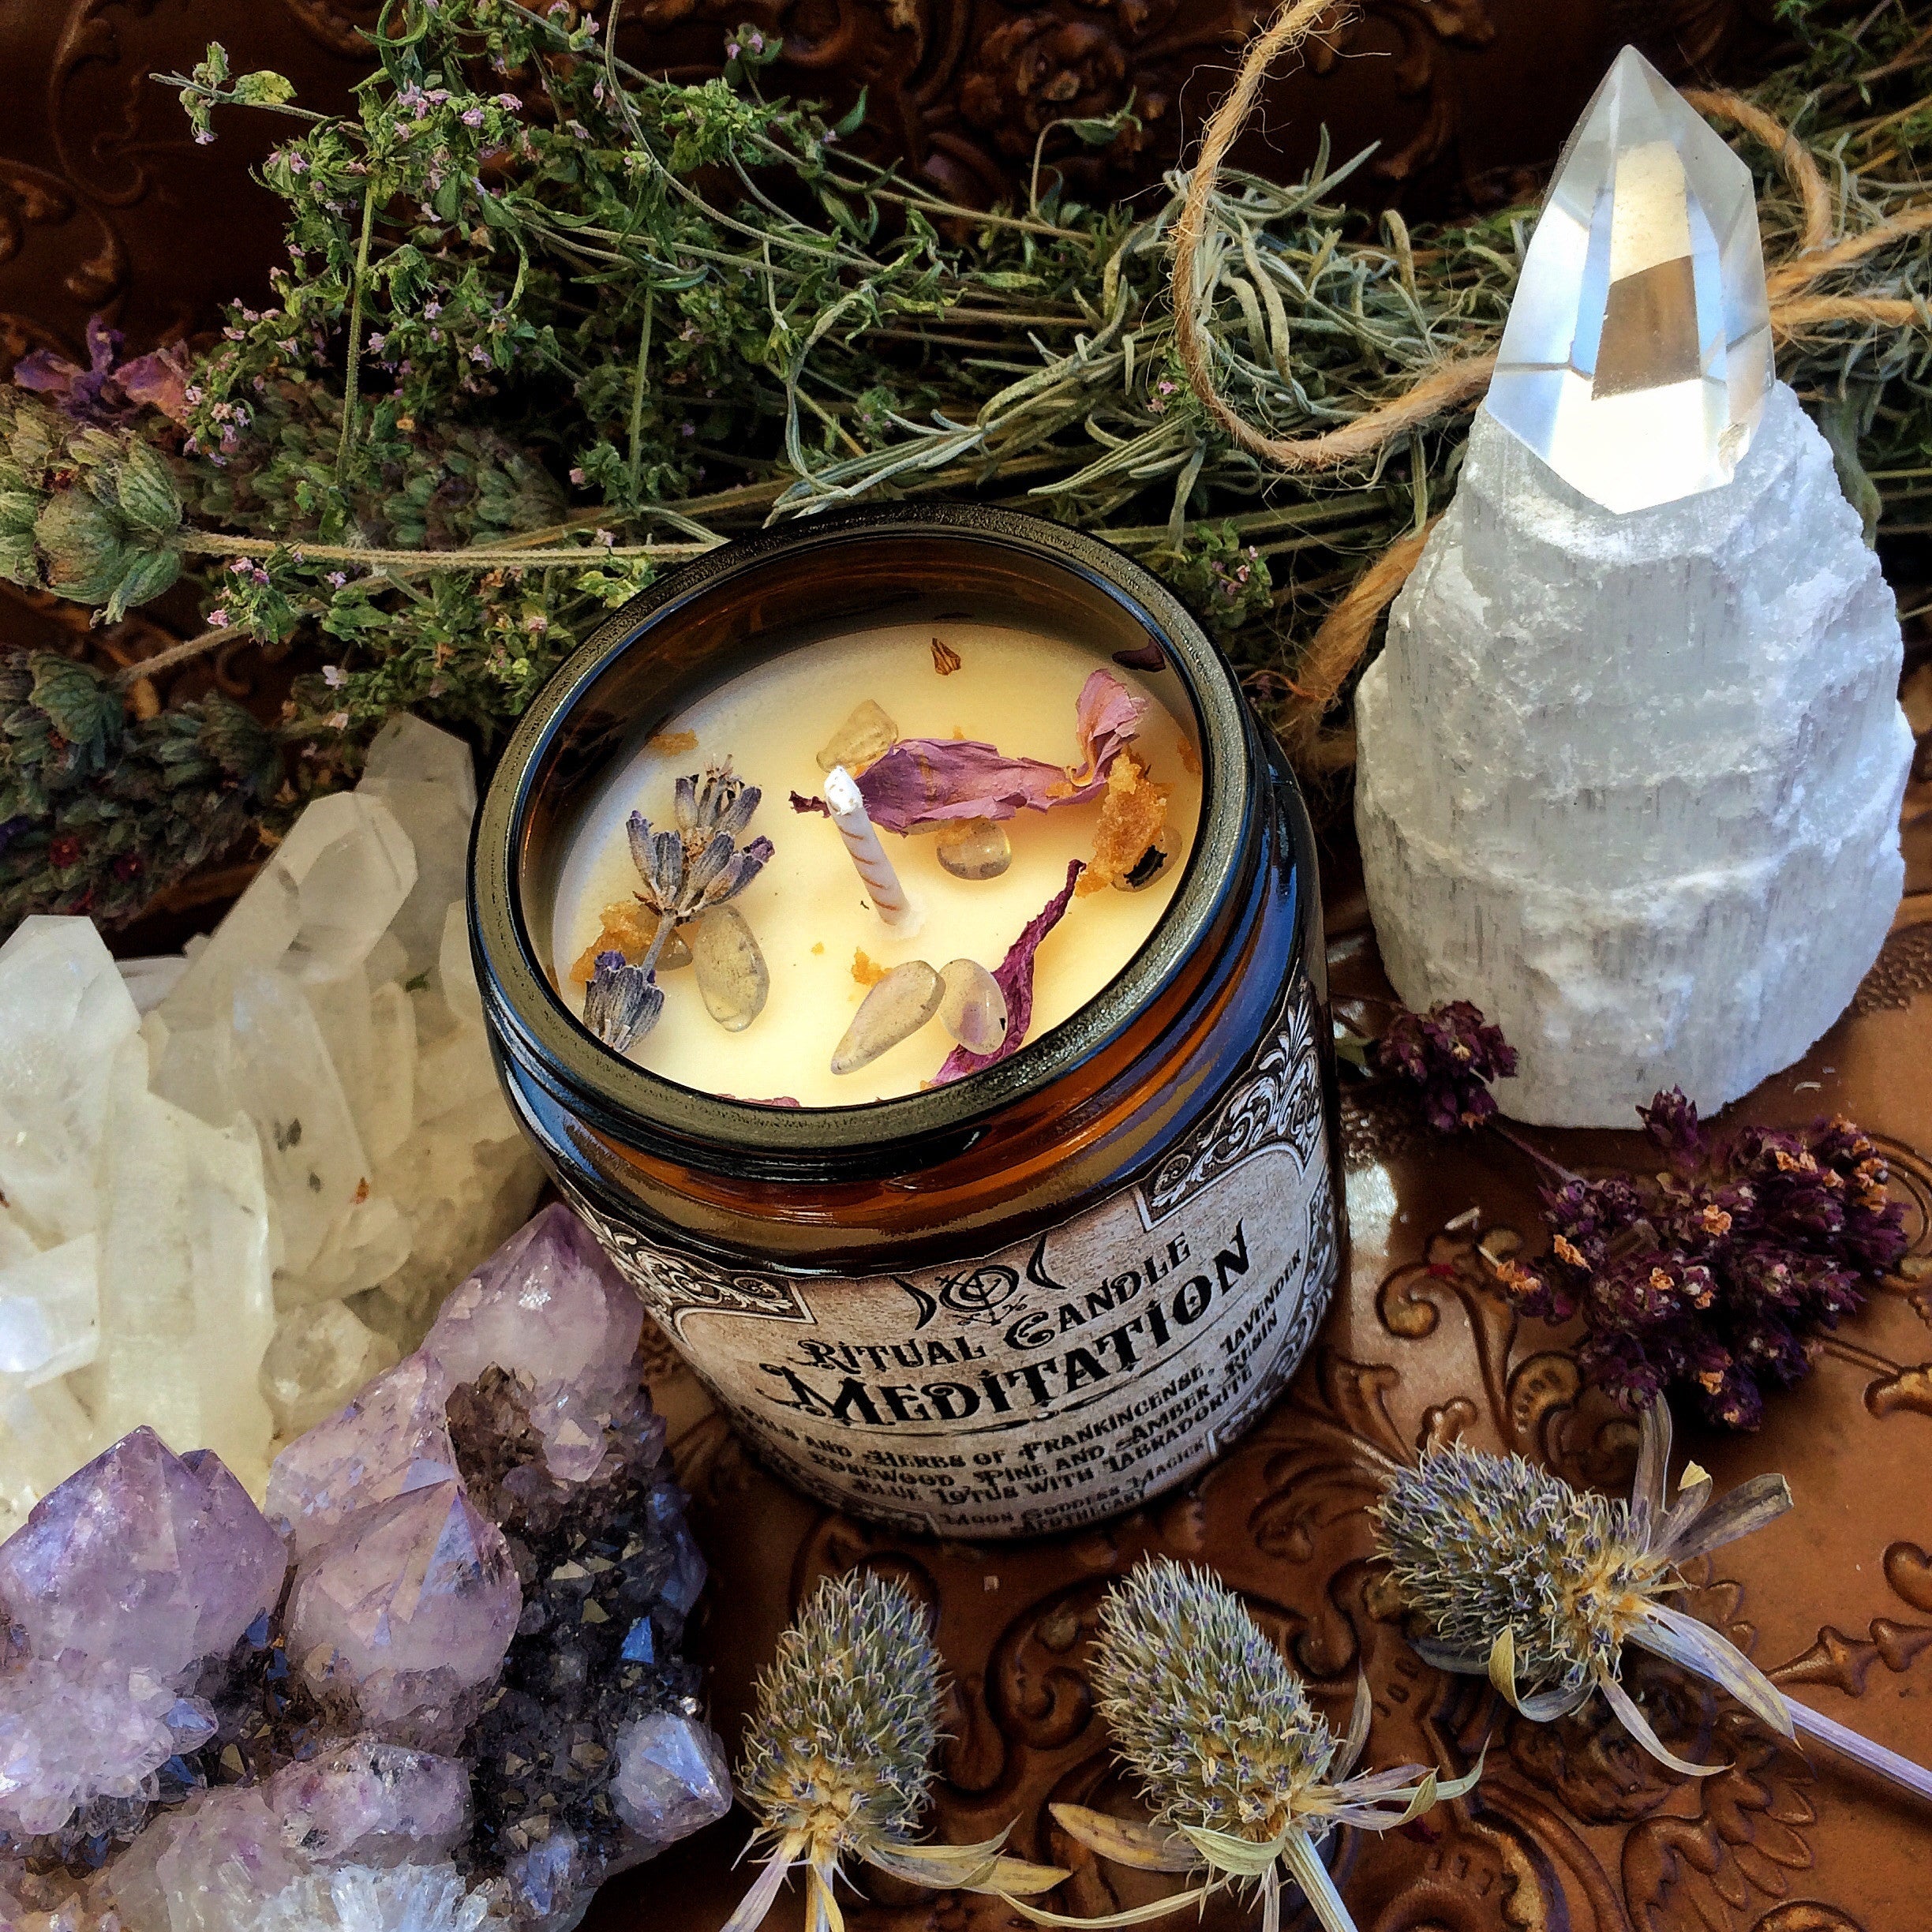 Meditation Candle ~ WitchCrafted and Blessed by the Moon ~ Blue Lotus ~ Frankincense~ Meditation ~ Spiritual Journey ~ 4oz ~30 hour - Moon Goddess Magick Apothecary 